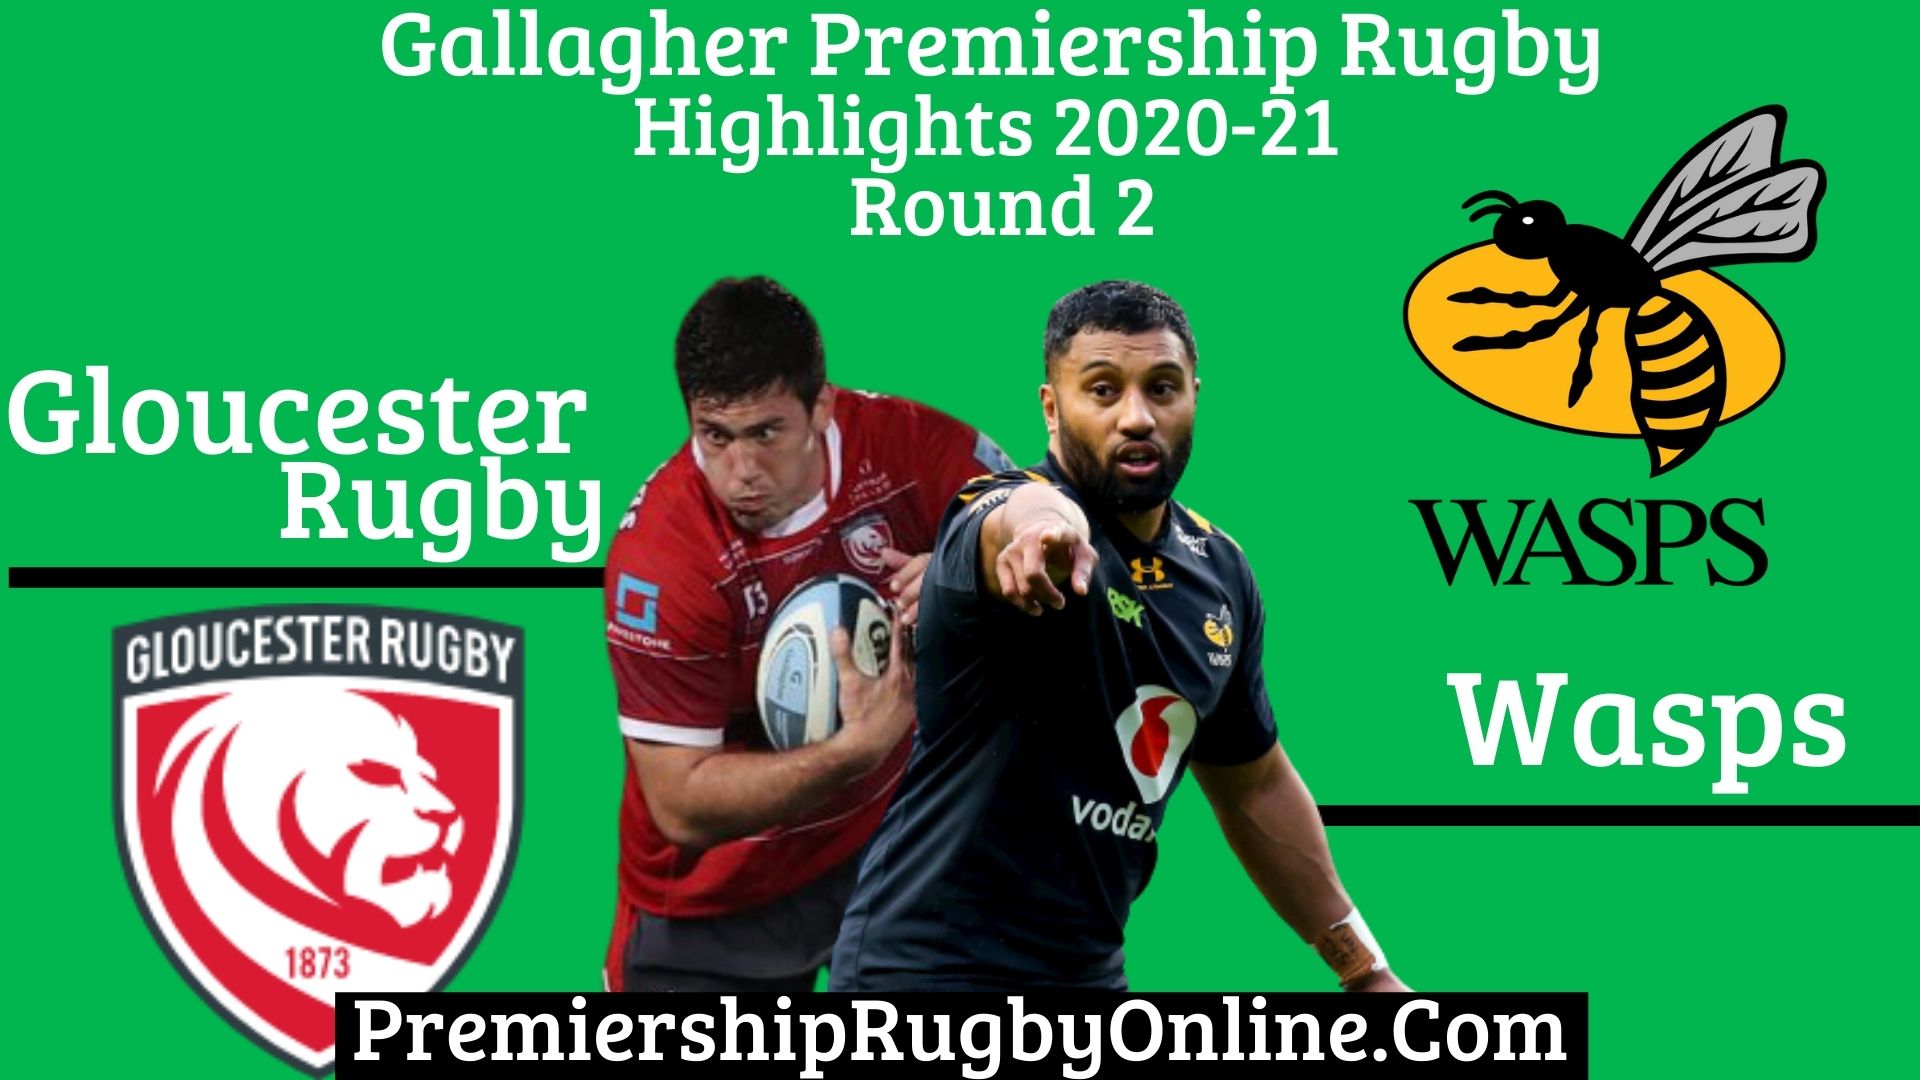 Gloucester Rugby Vs Wasps Highlights 2020 RD 2